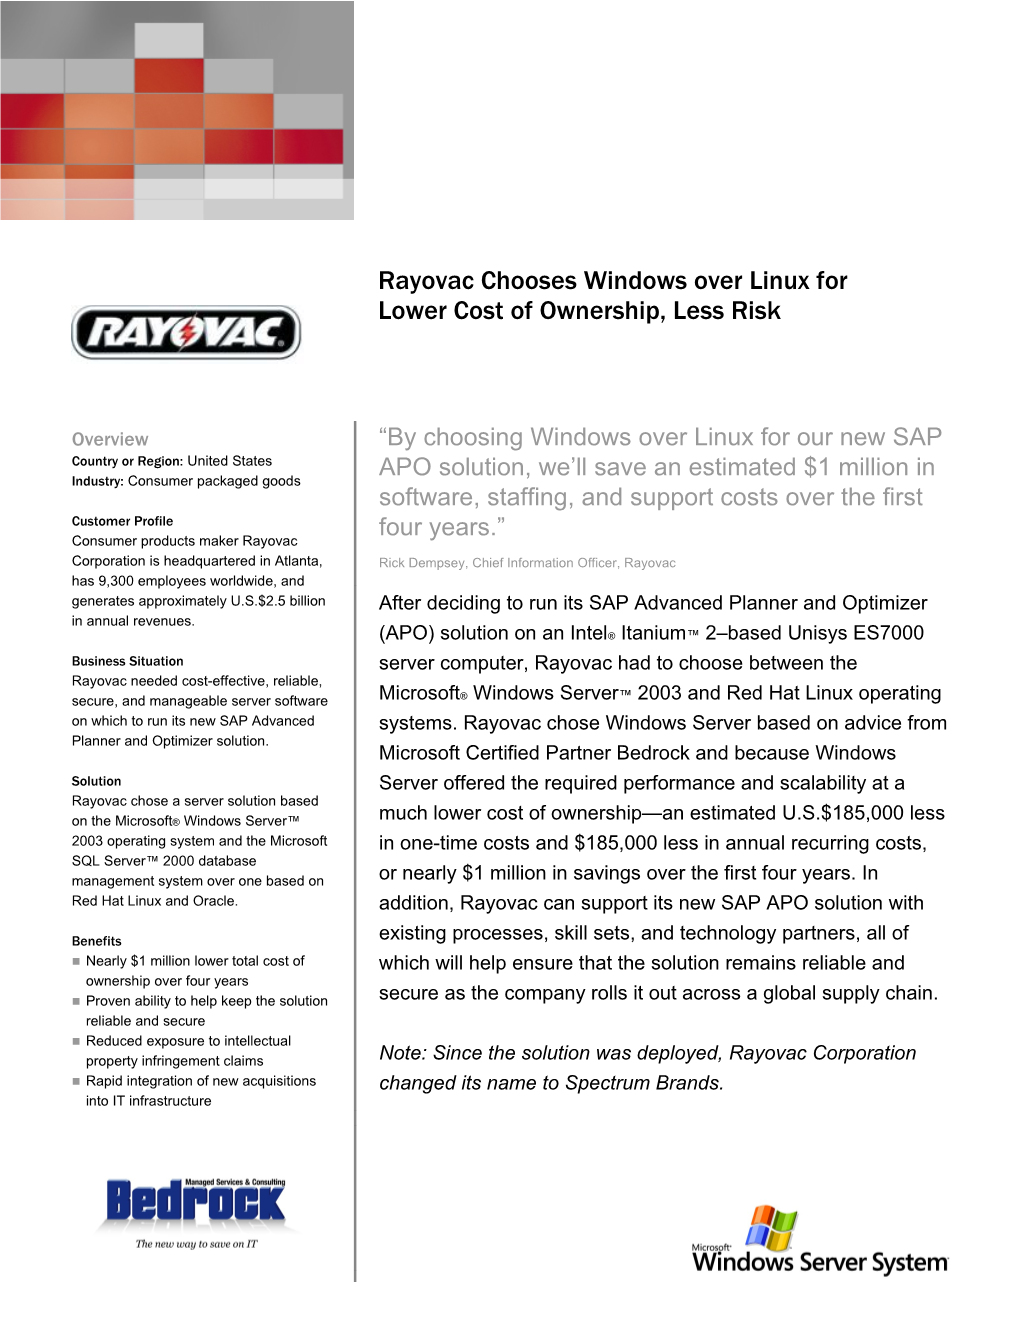 Rayovac Chooses Windows Over Linux for Lower Cost of Ownership, Less Risk